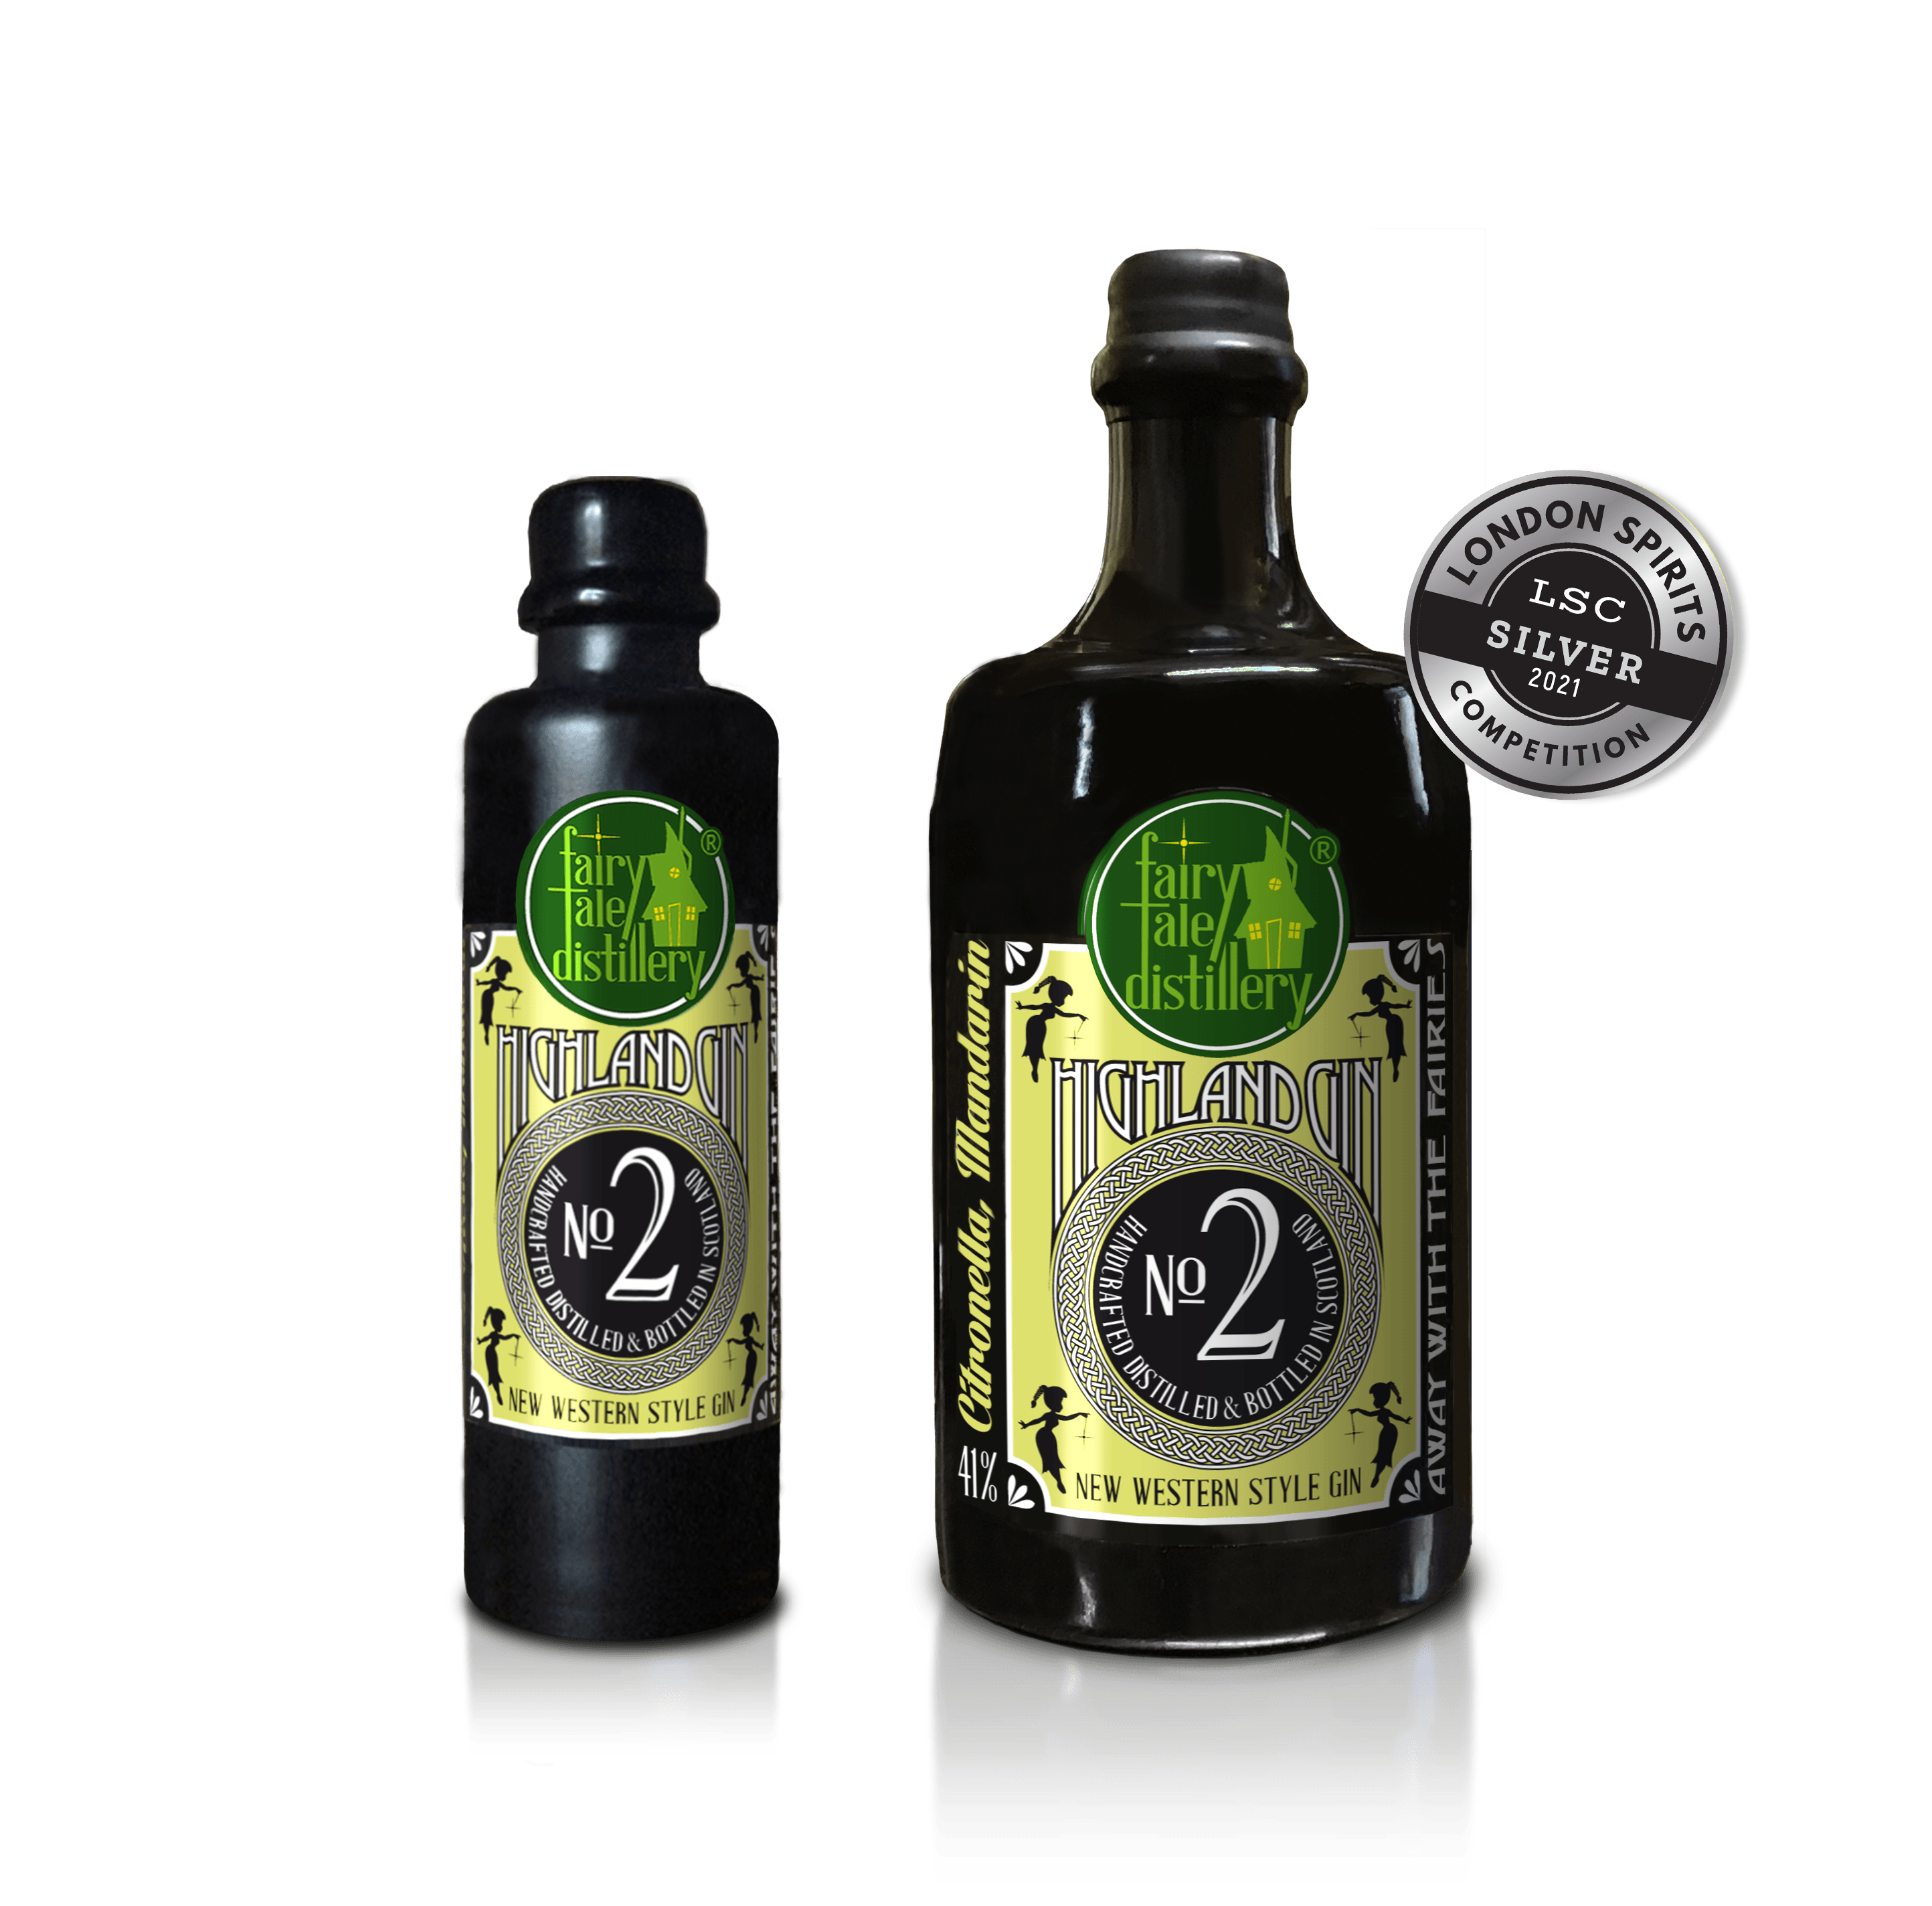 No 2 New Western Style Highland Gin bottle from Fairytale Distillery with London Spirits Competition 2021 Silver